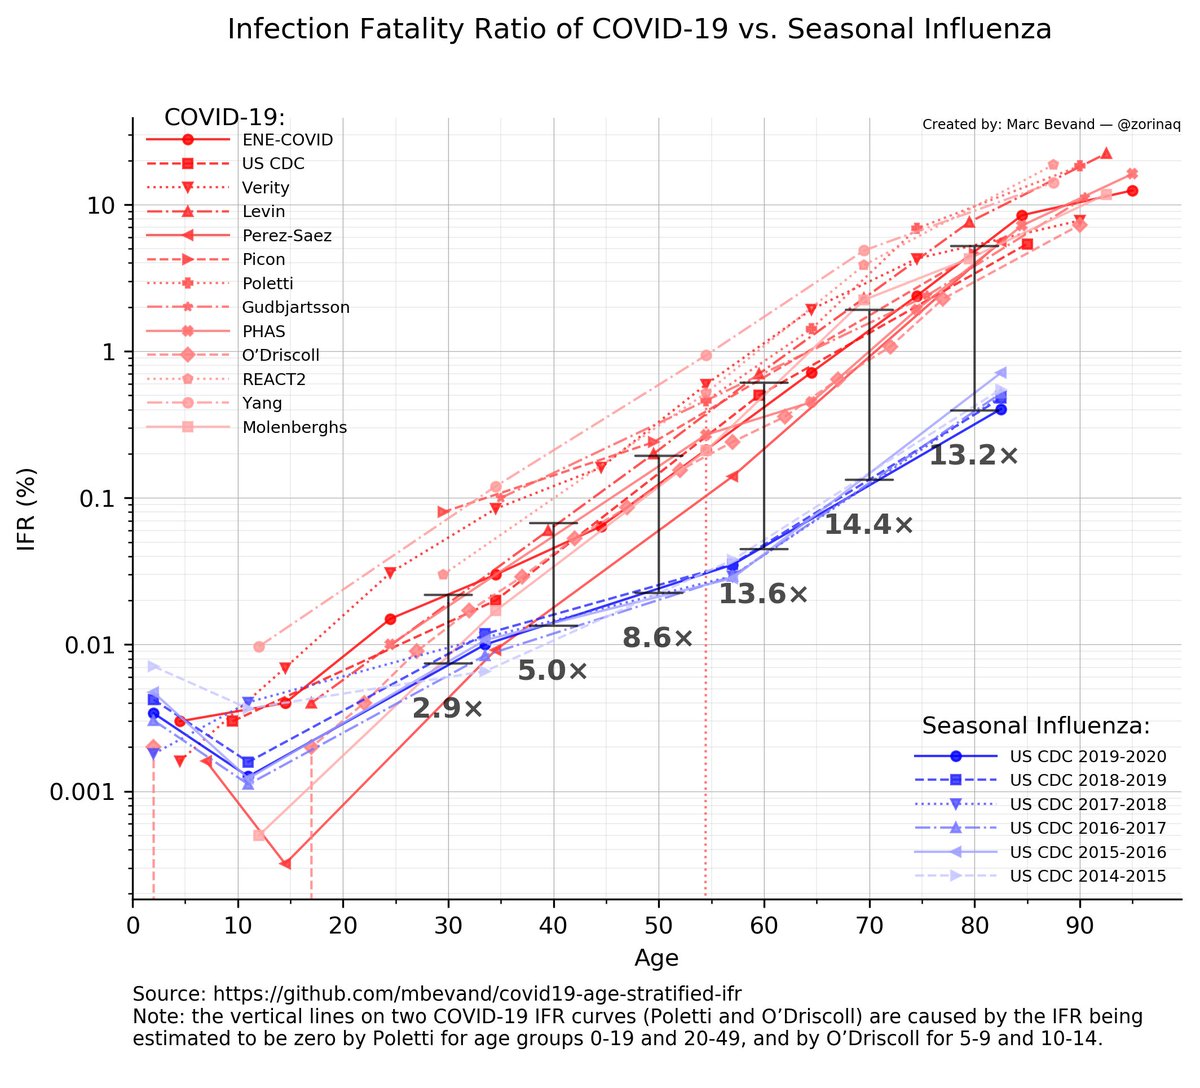 Charting the age-stratified Infection Fatality Ratio of COVID-19 vs seasonal influenza: covid is significantly more fatal than the flu at all ages above 30:

• 2.9× more fatal at age 30
• 5.0× at 40
• 8.6× at 50
• 13.6× at 60
• 14.4× at 70

Source: github.com/mbevand/covid1… .